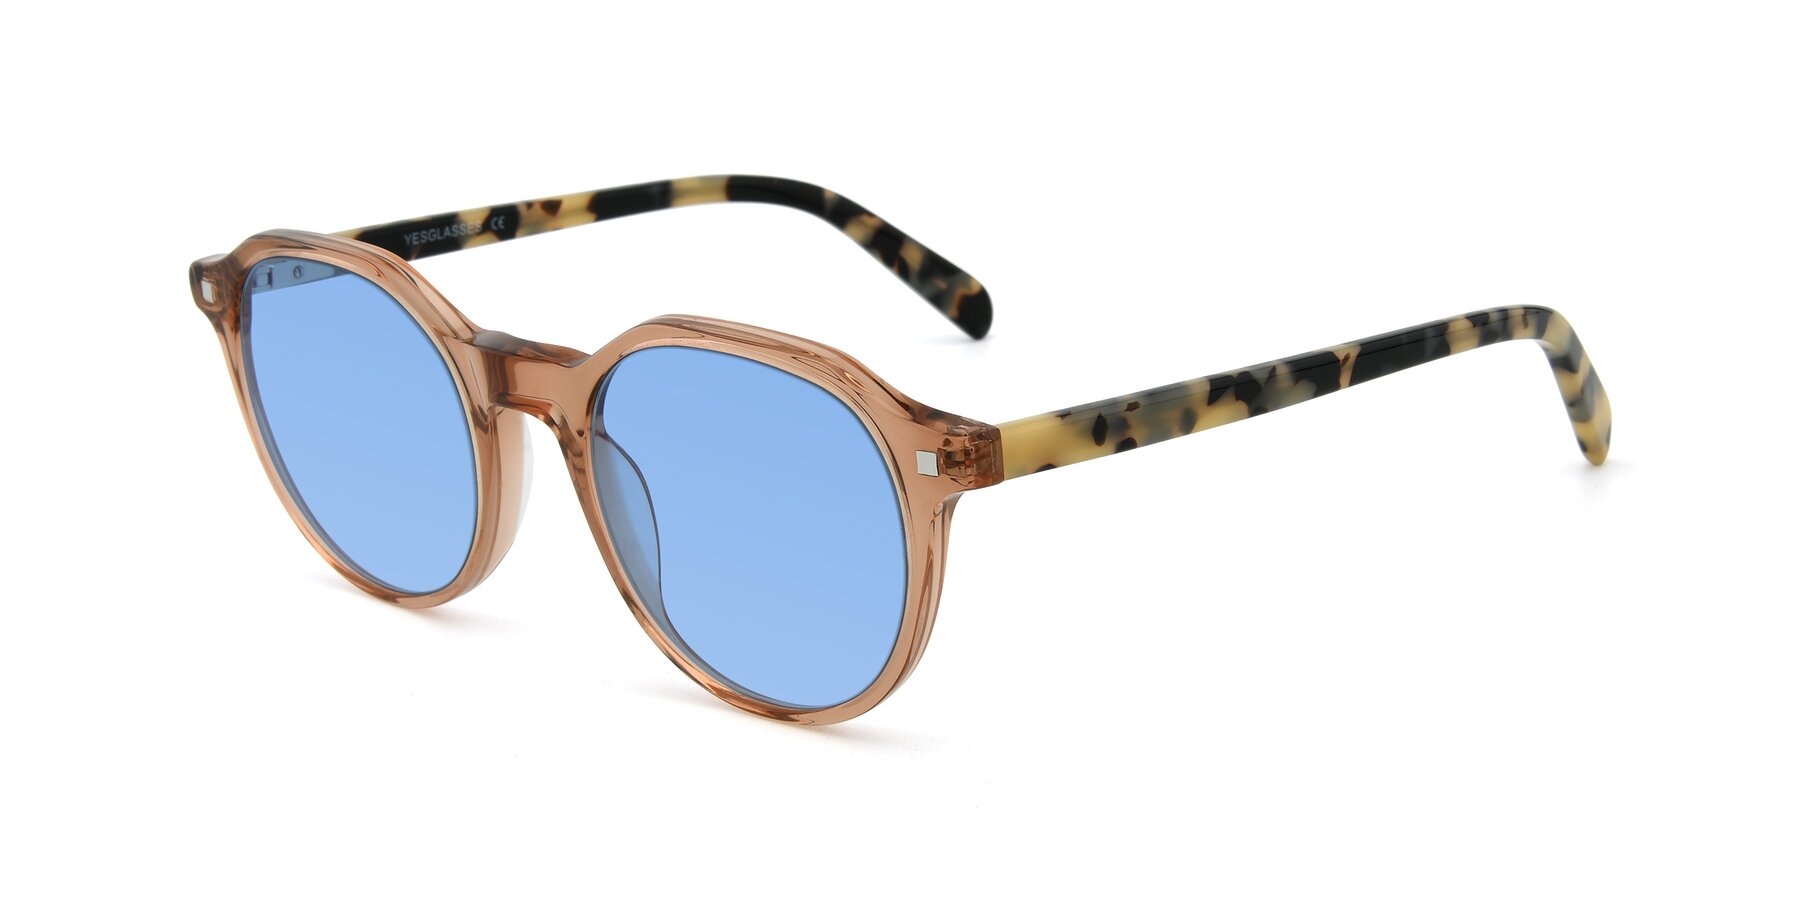 Angle of 17425 in Transparent Caramel with Medium Blue Tinted Lenses